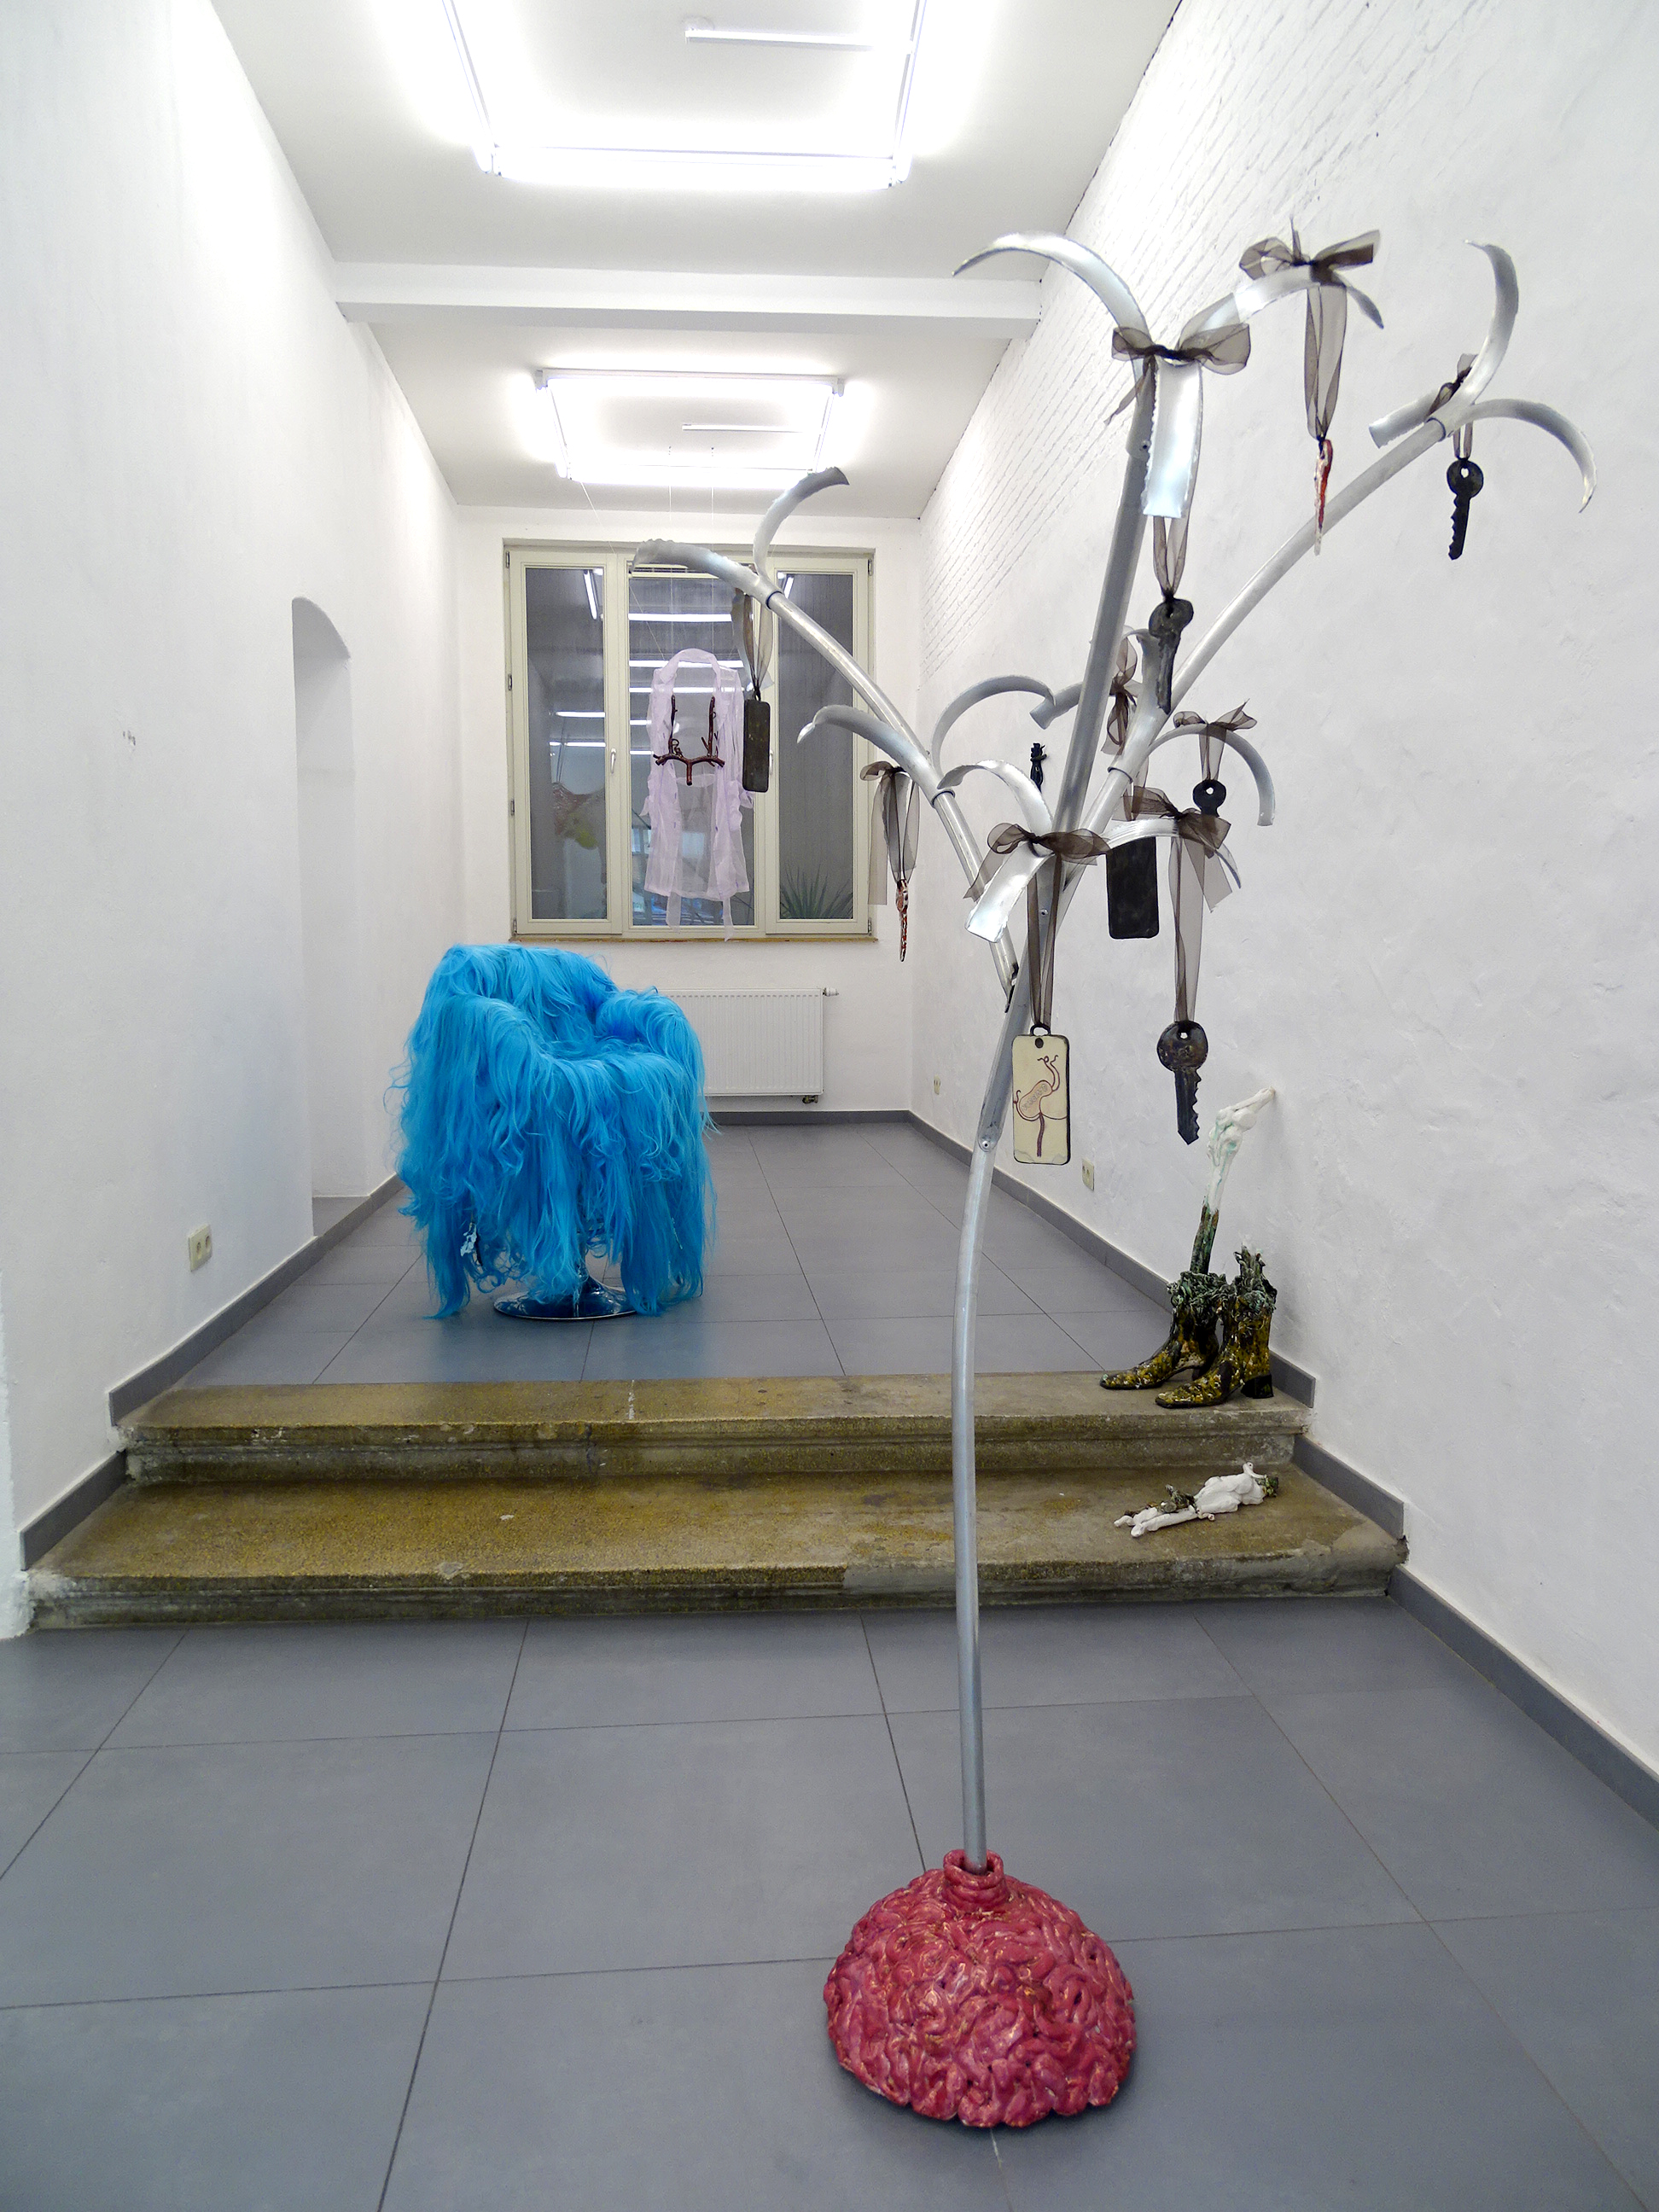 (09) Of All the Things I’ve Lost Proudick (Lindsey Mendick & Paloma Proudfoot) Installation view Hannah Barry Gallery at Ballon Rouge Club Brussels 2019  courtesy Hannah Barry Gallery.jpg